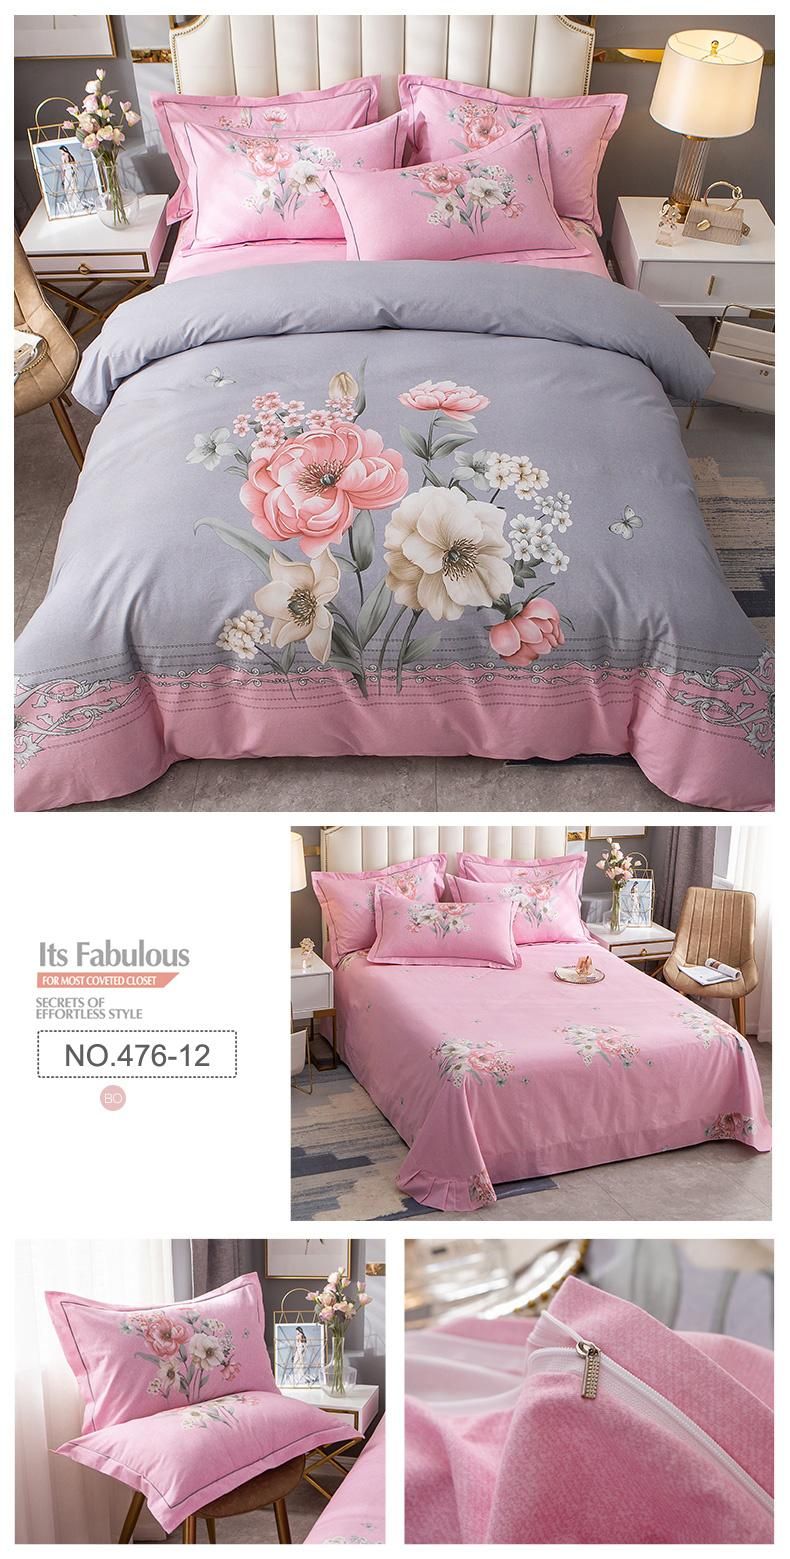 Home Decoration Good Quality Bedding Set Cotton Fabric Comfortable for 4PCS King Bed